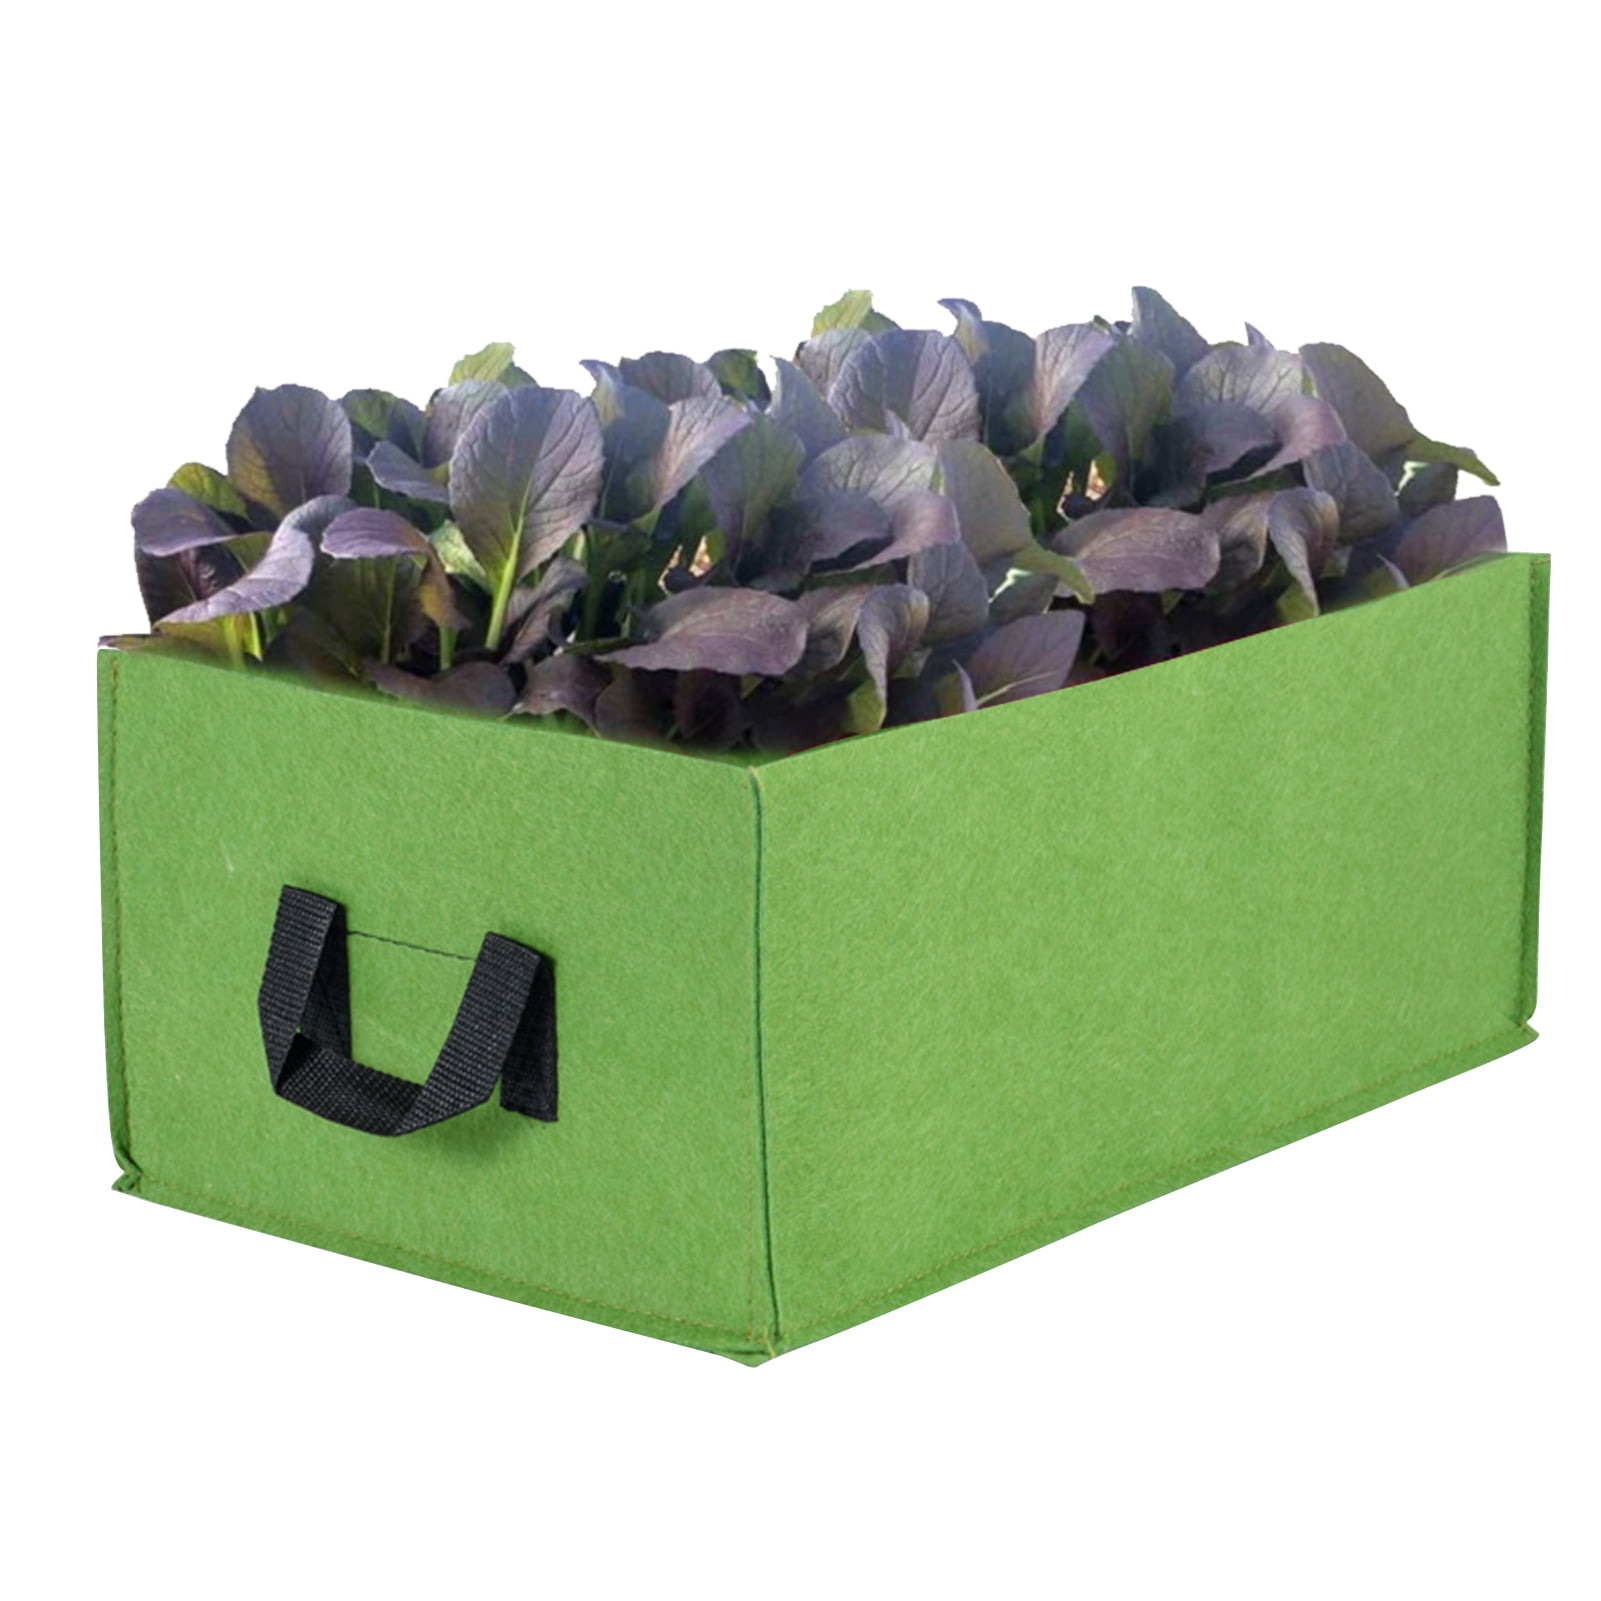 Details about   Vegetable Flower Planting Bed Raised Fabric Plant Elevated Grow Bag Box Garden 